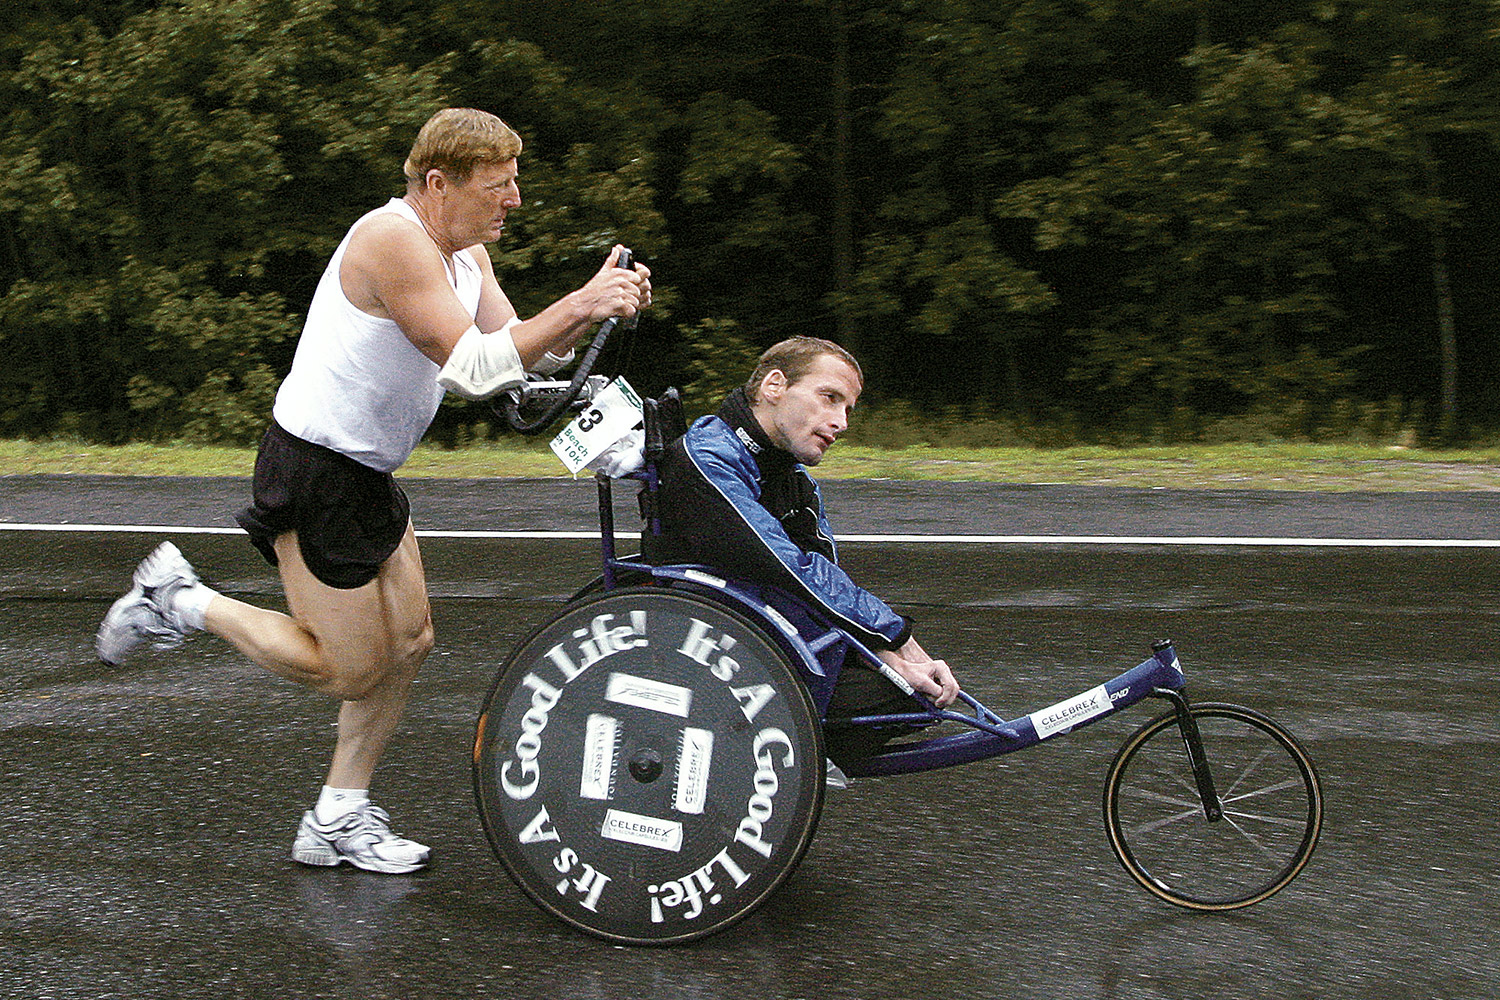 Dick Hoyt pushes his son Rick off from the starting line at the Peoples Beach to Beacon 10K road rac